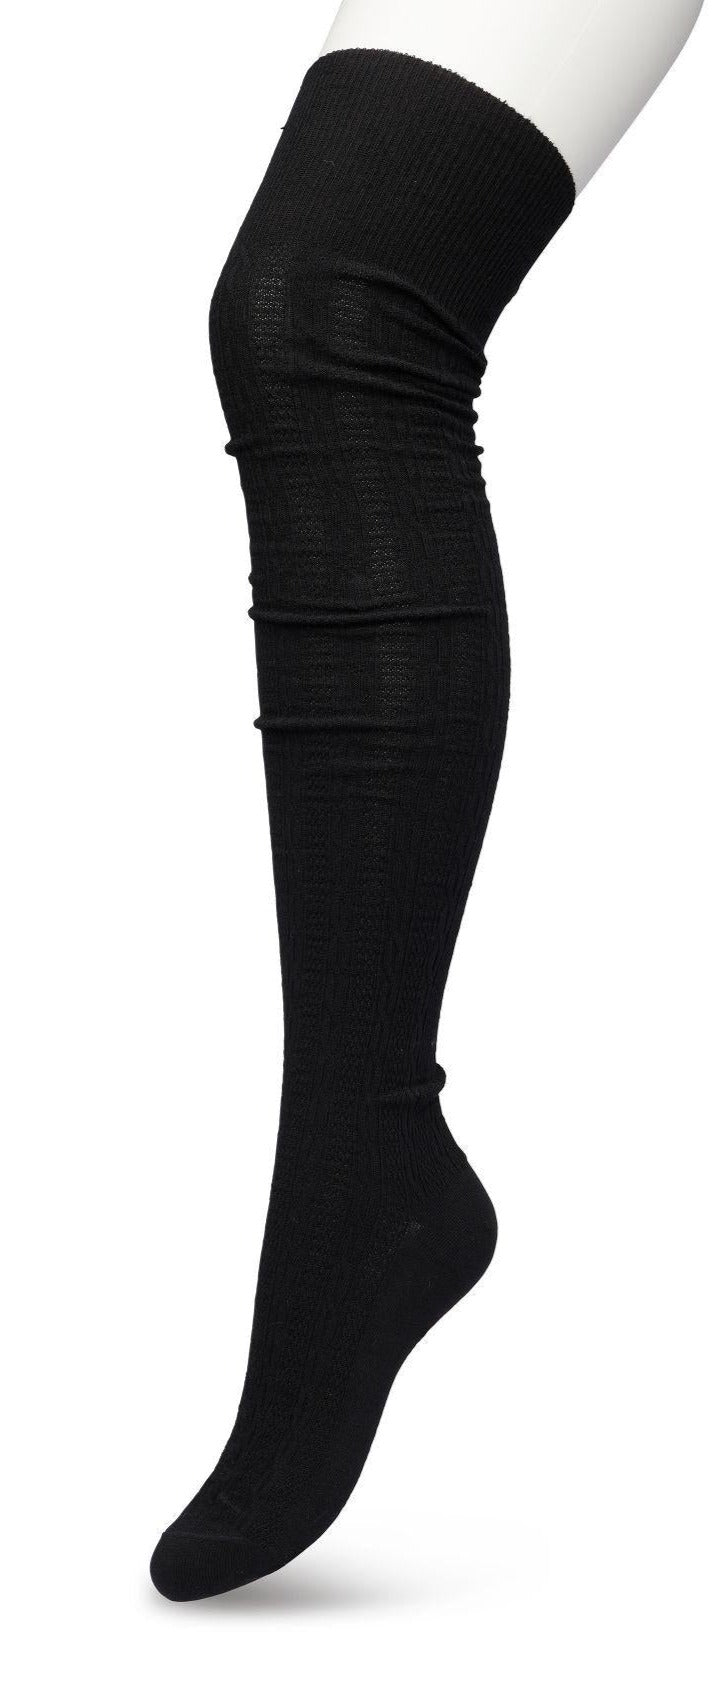 Bonnie Doon Cable Over-Knee Sock - Black cotton knitted over the knee socks with a cable knit style ribbed pattern 